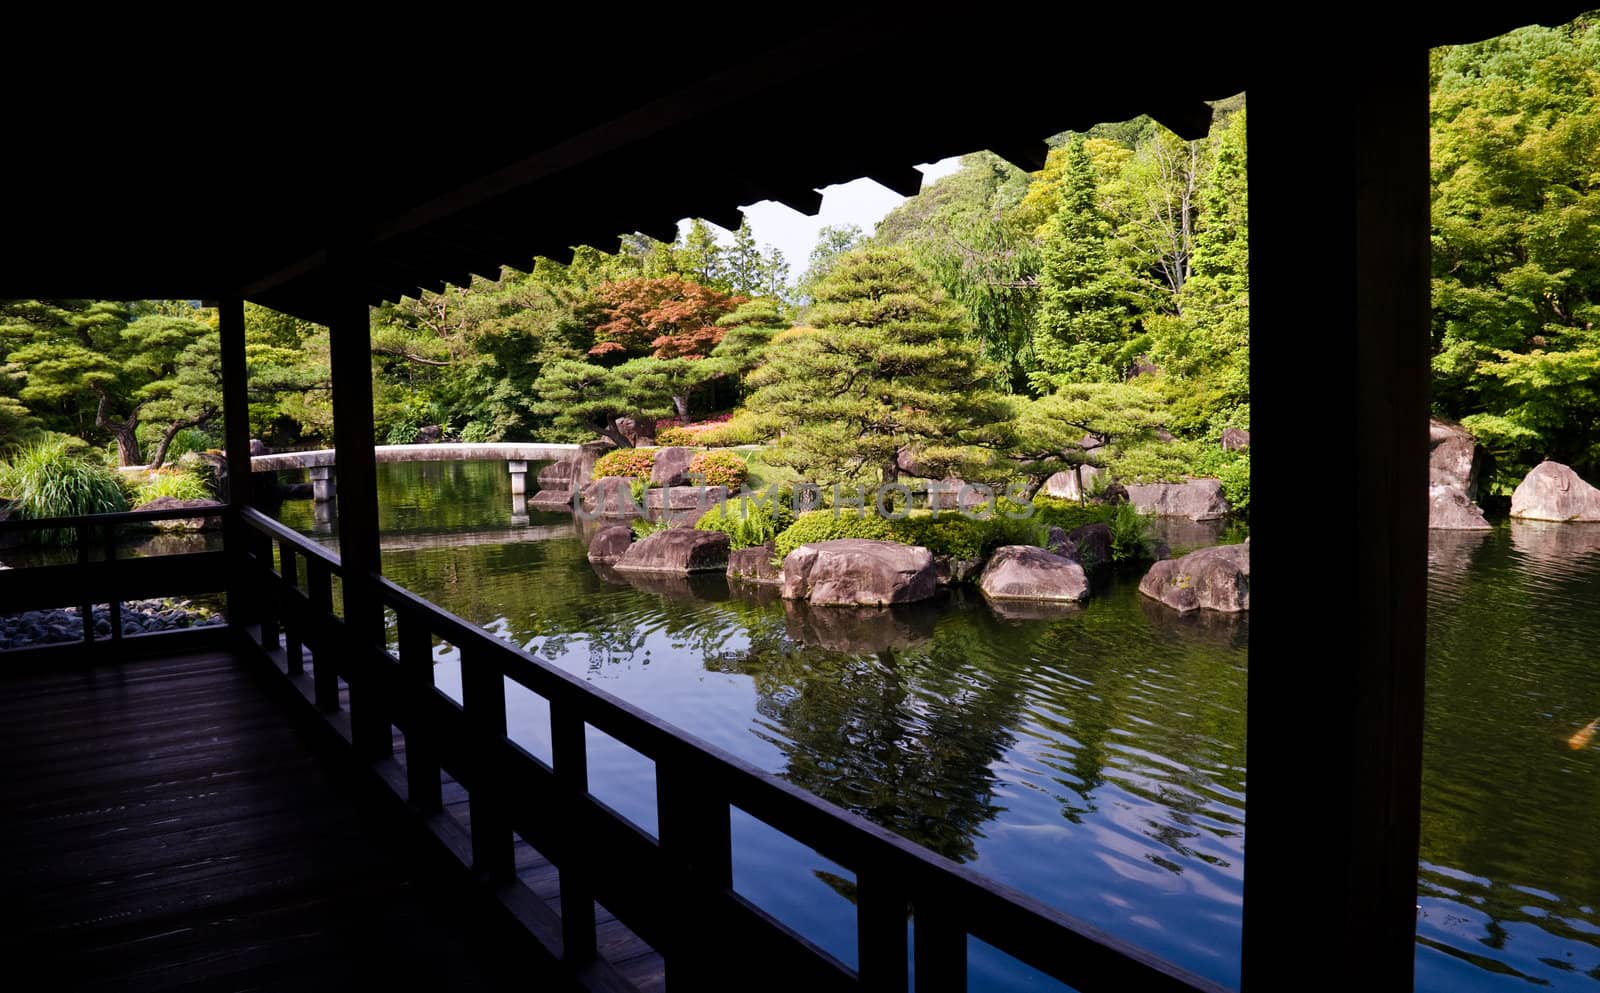 View from a verandah of a traditional japanese garden in Kyoto, Japan.